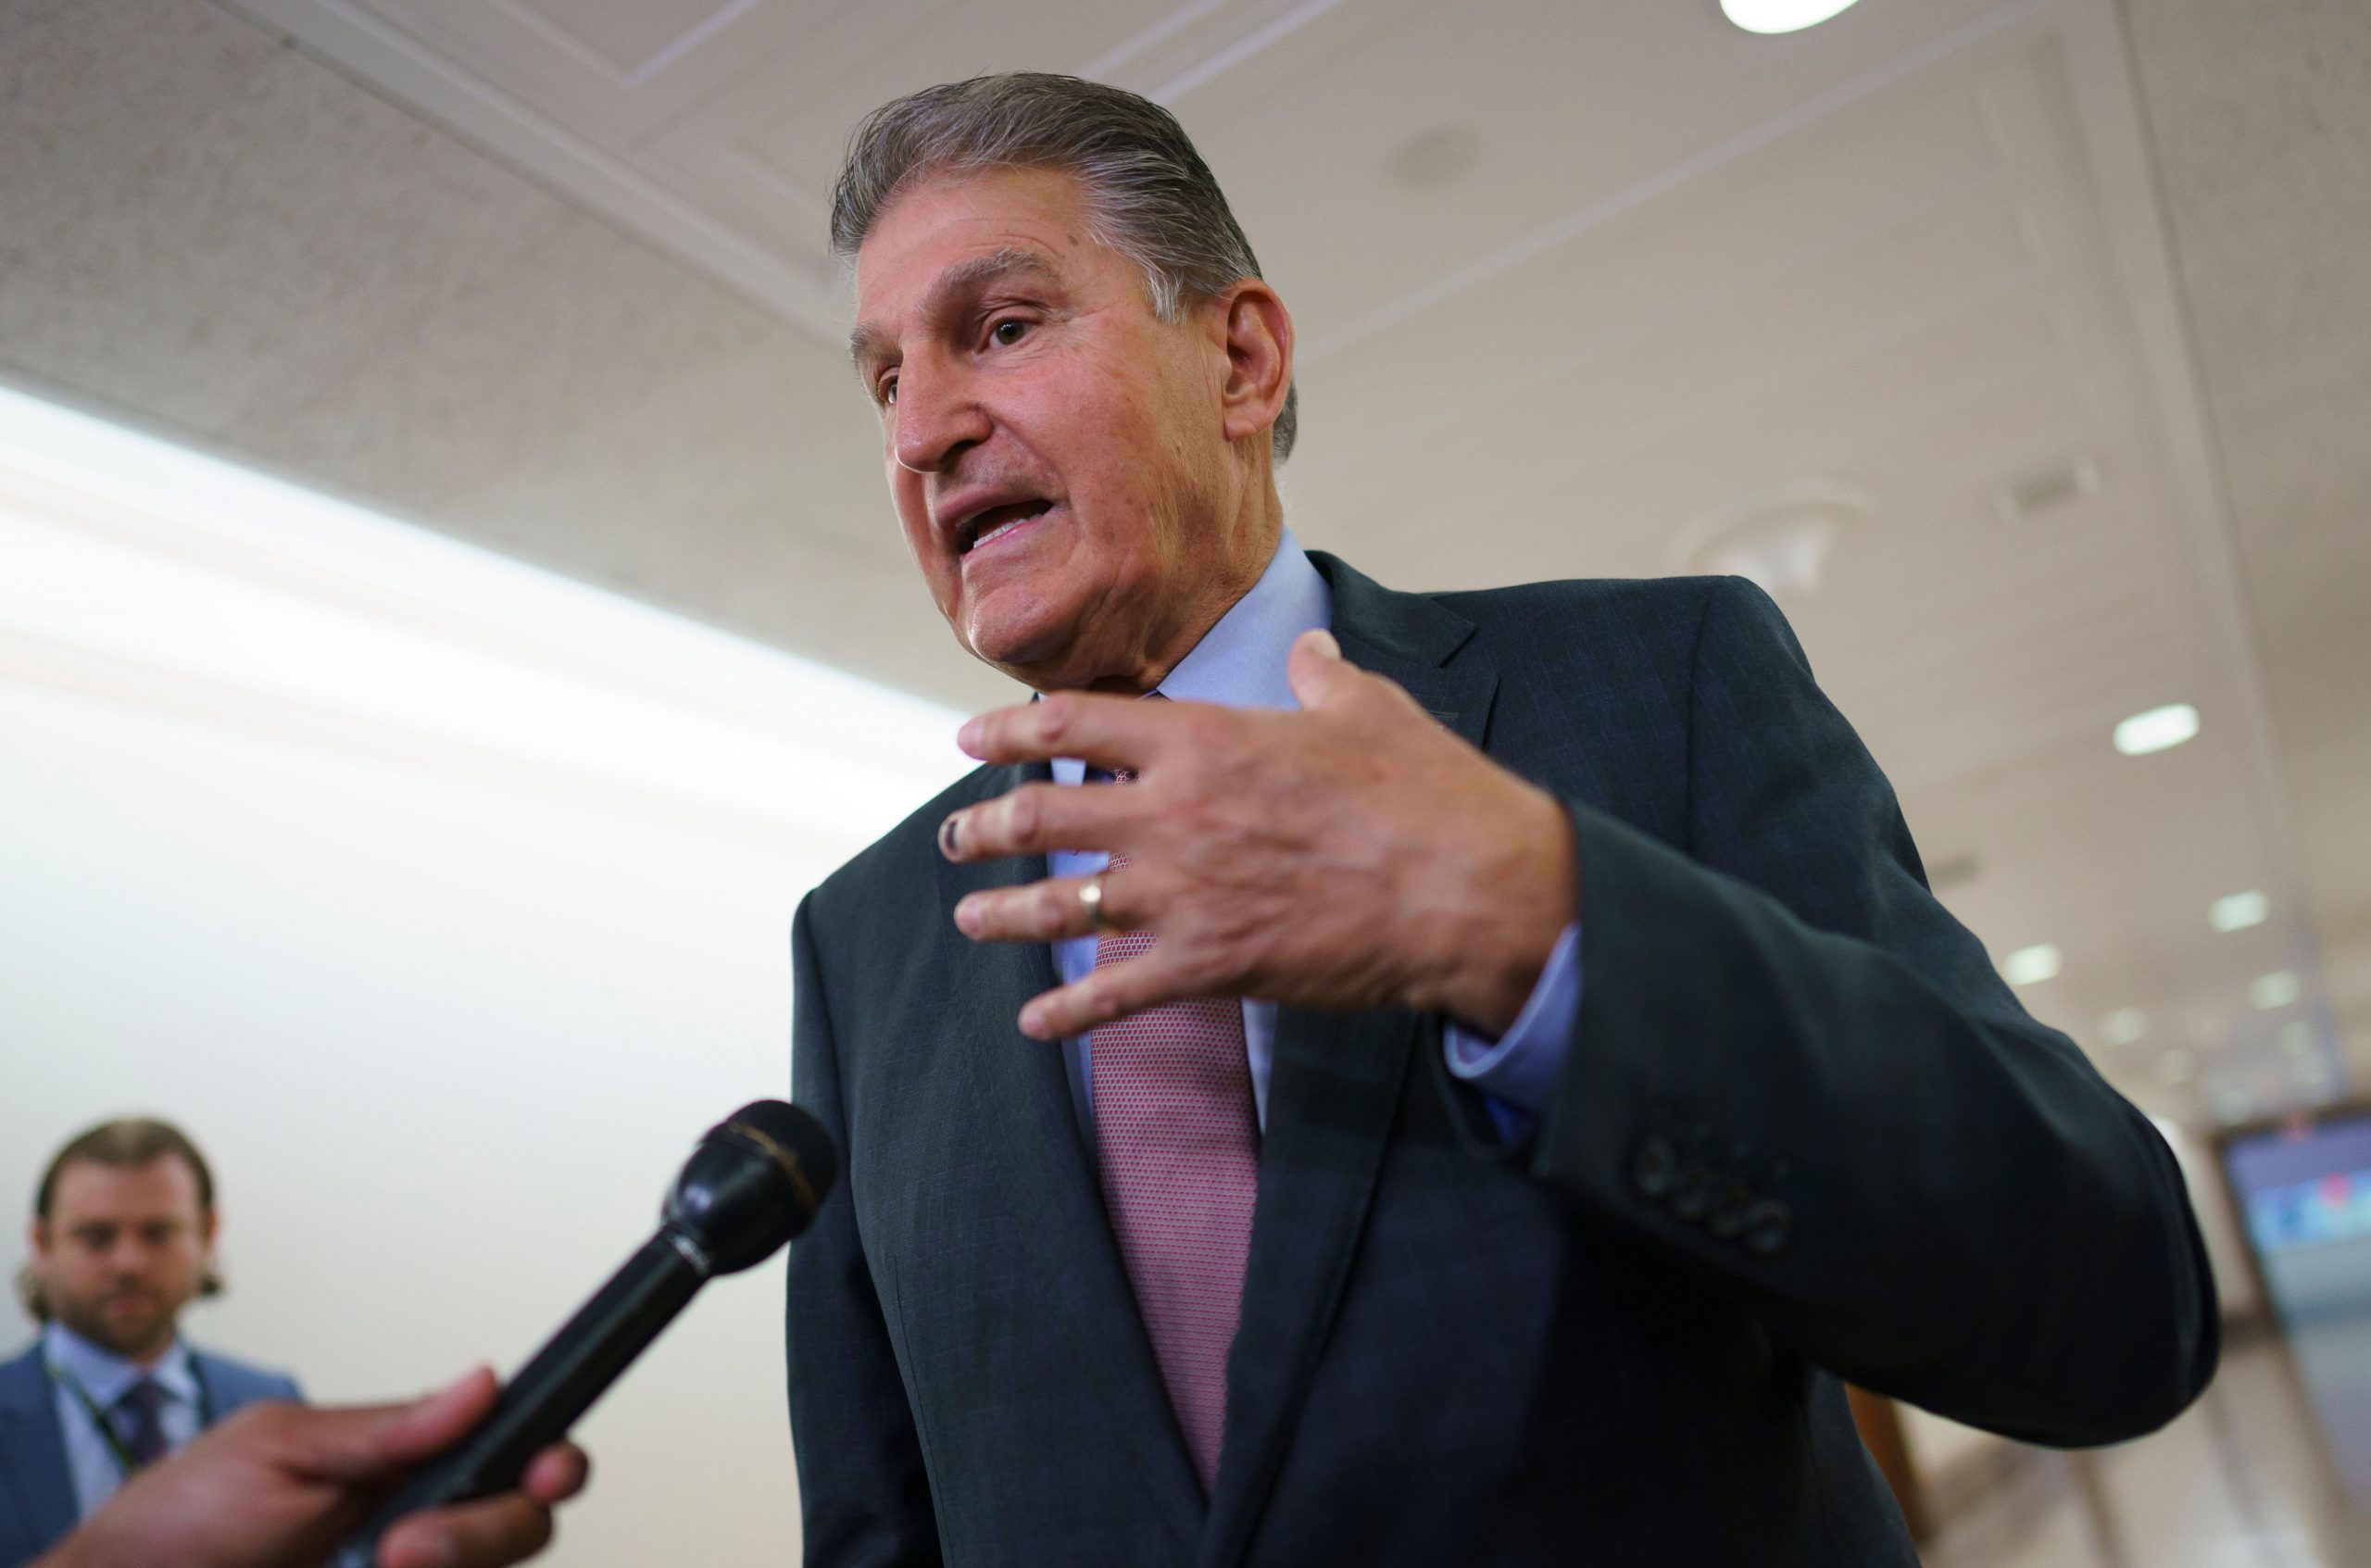 How the turntables: Manchin now in agreement with Schumer on health, energy